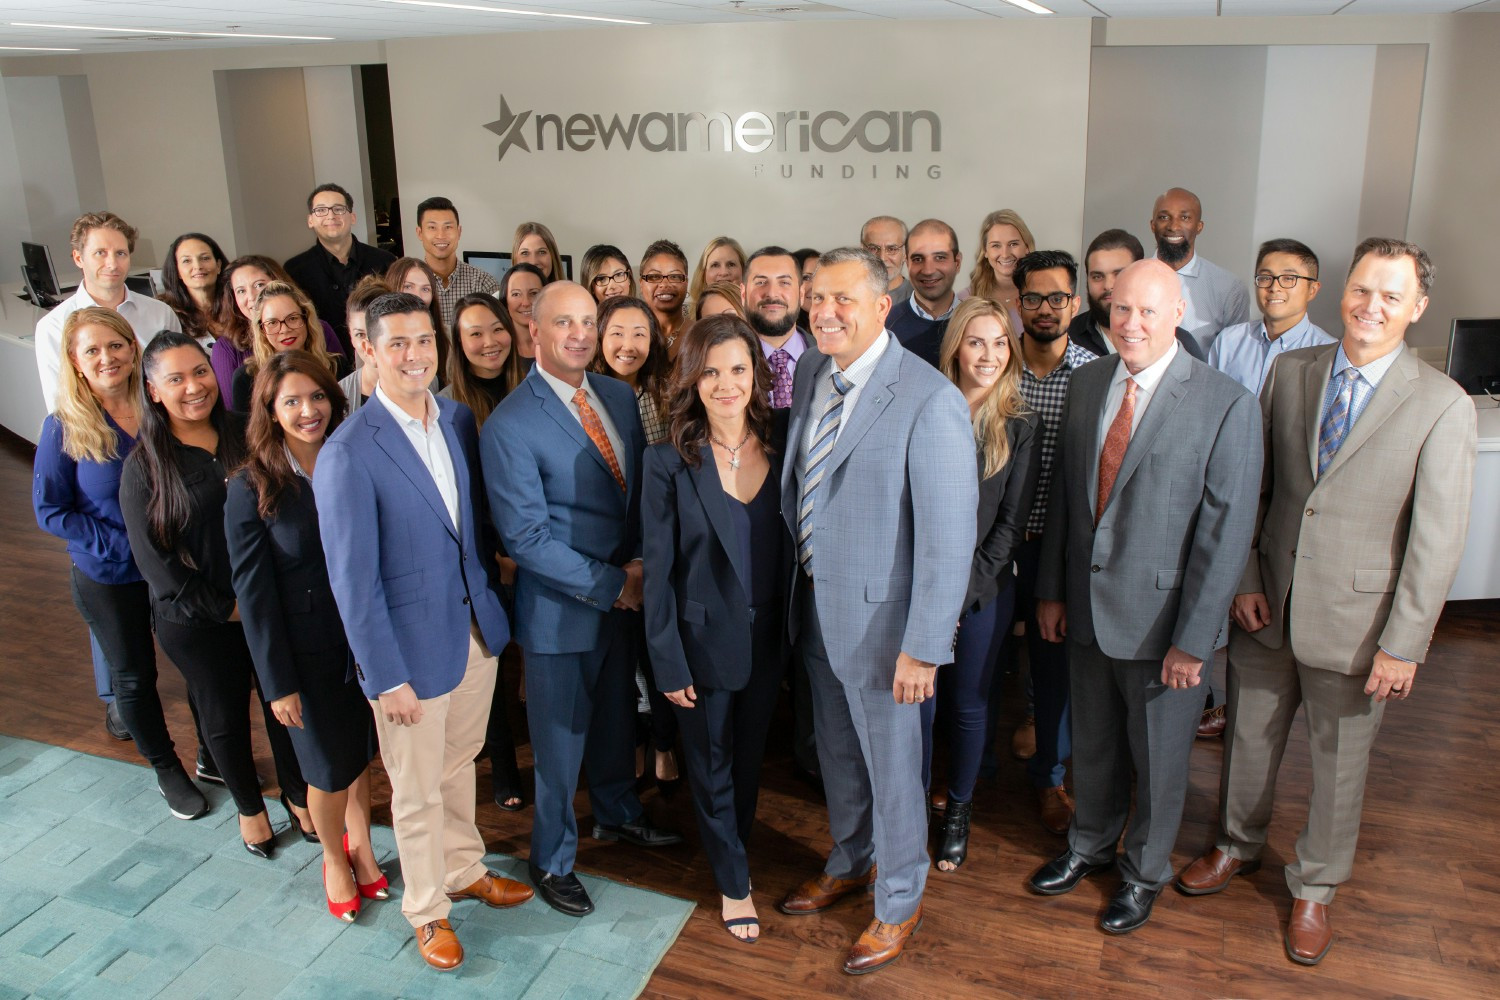 New American Funding employees with CEO, Rick Arvielo and President, Patty Arvielo